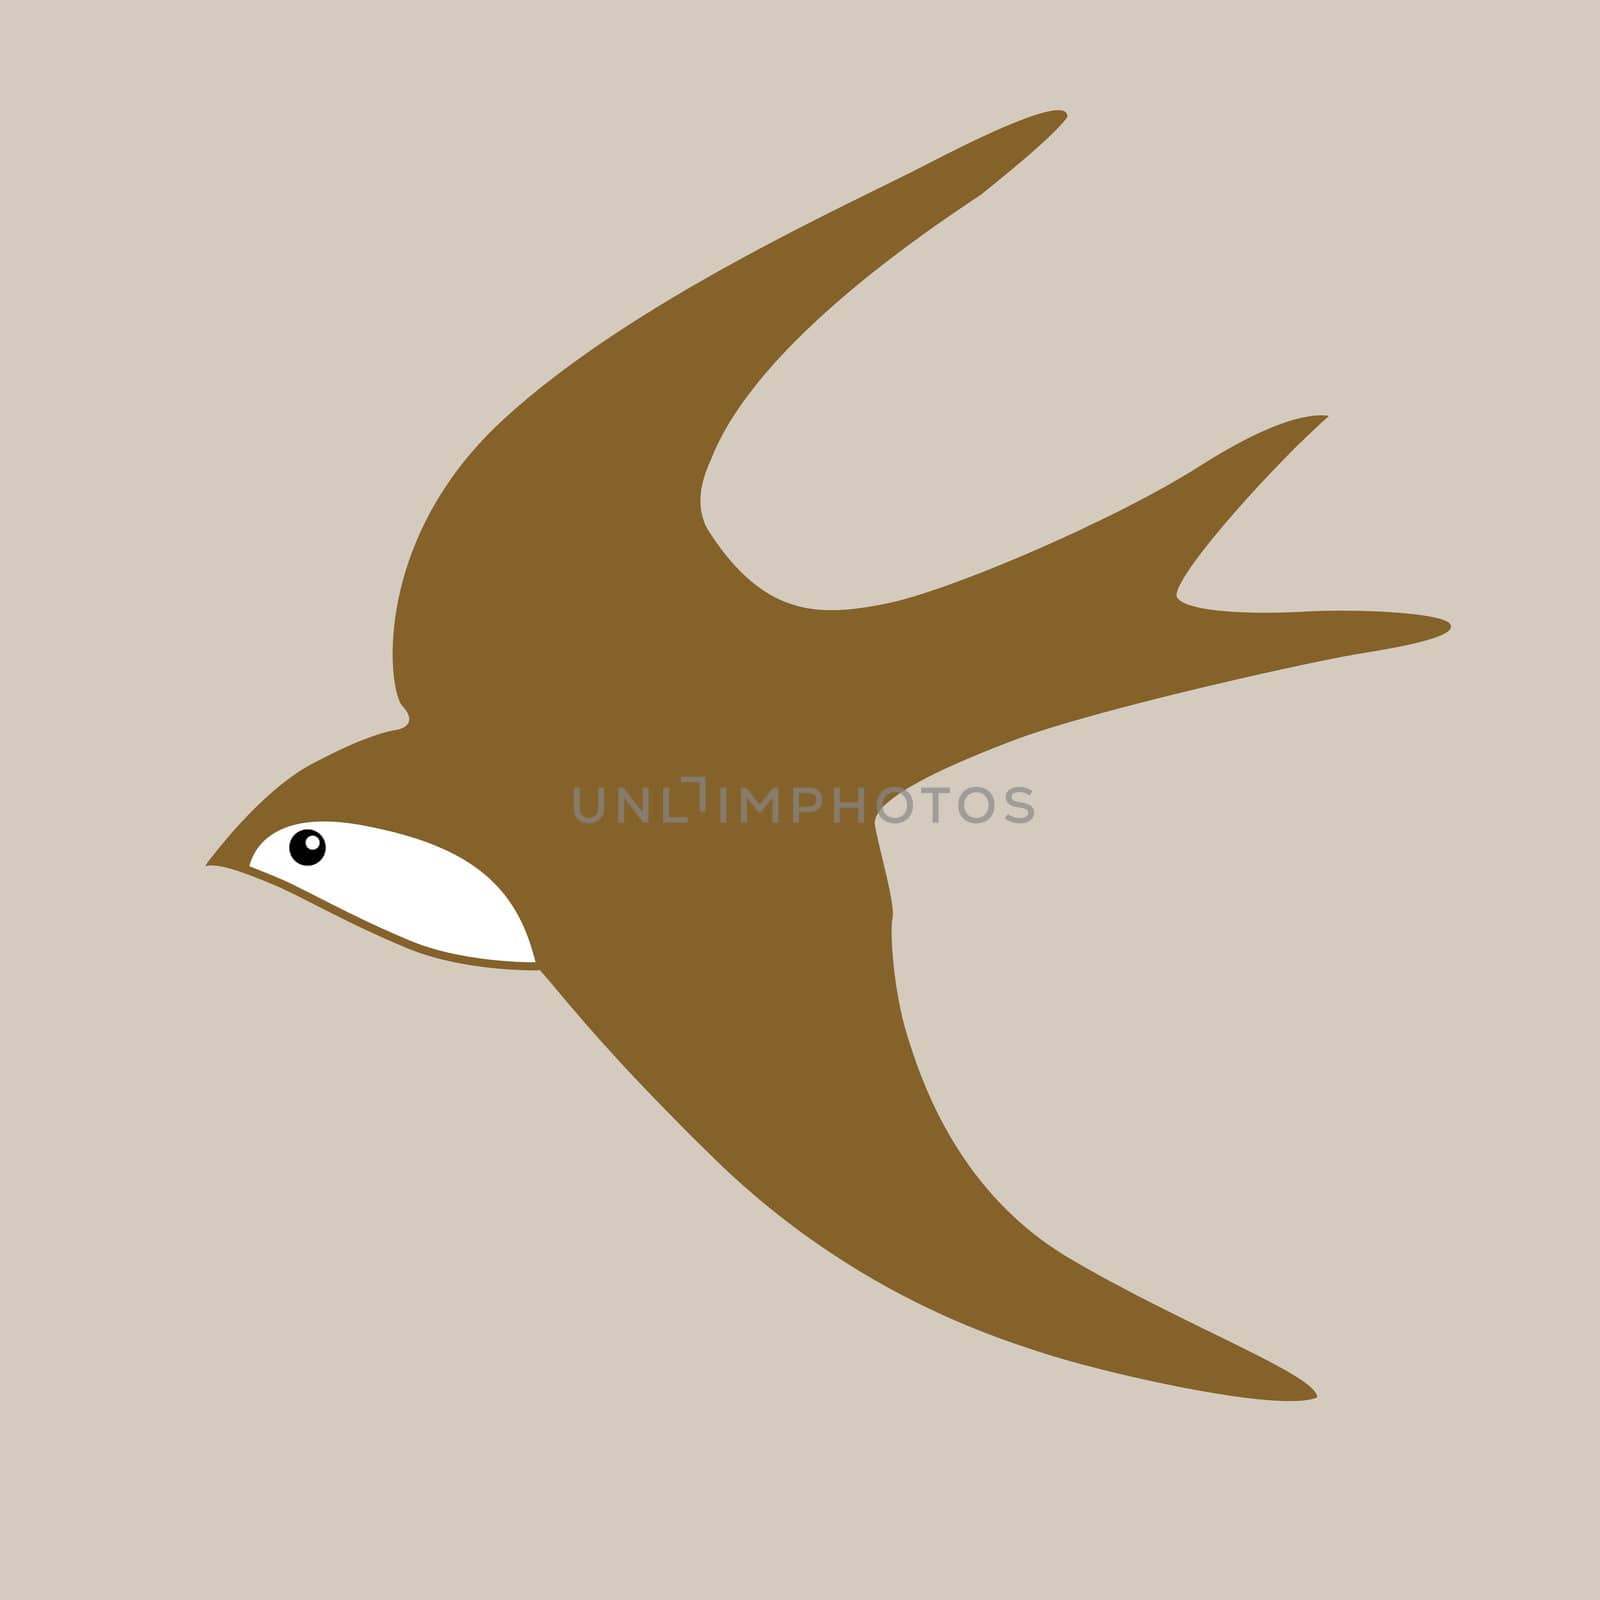 swallow silhouette on brown background, vector illustration by basel101658